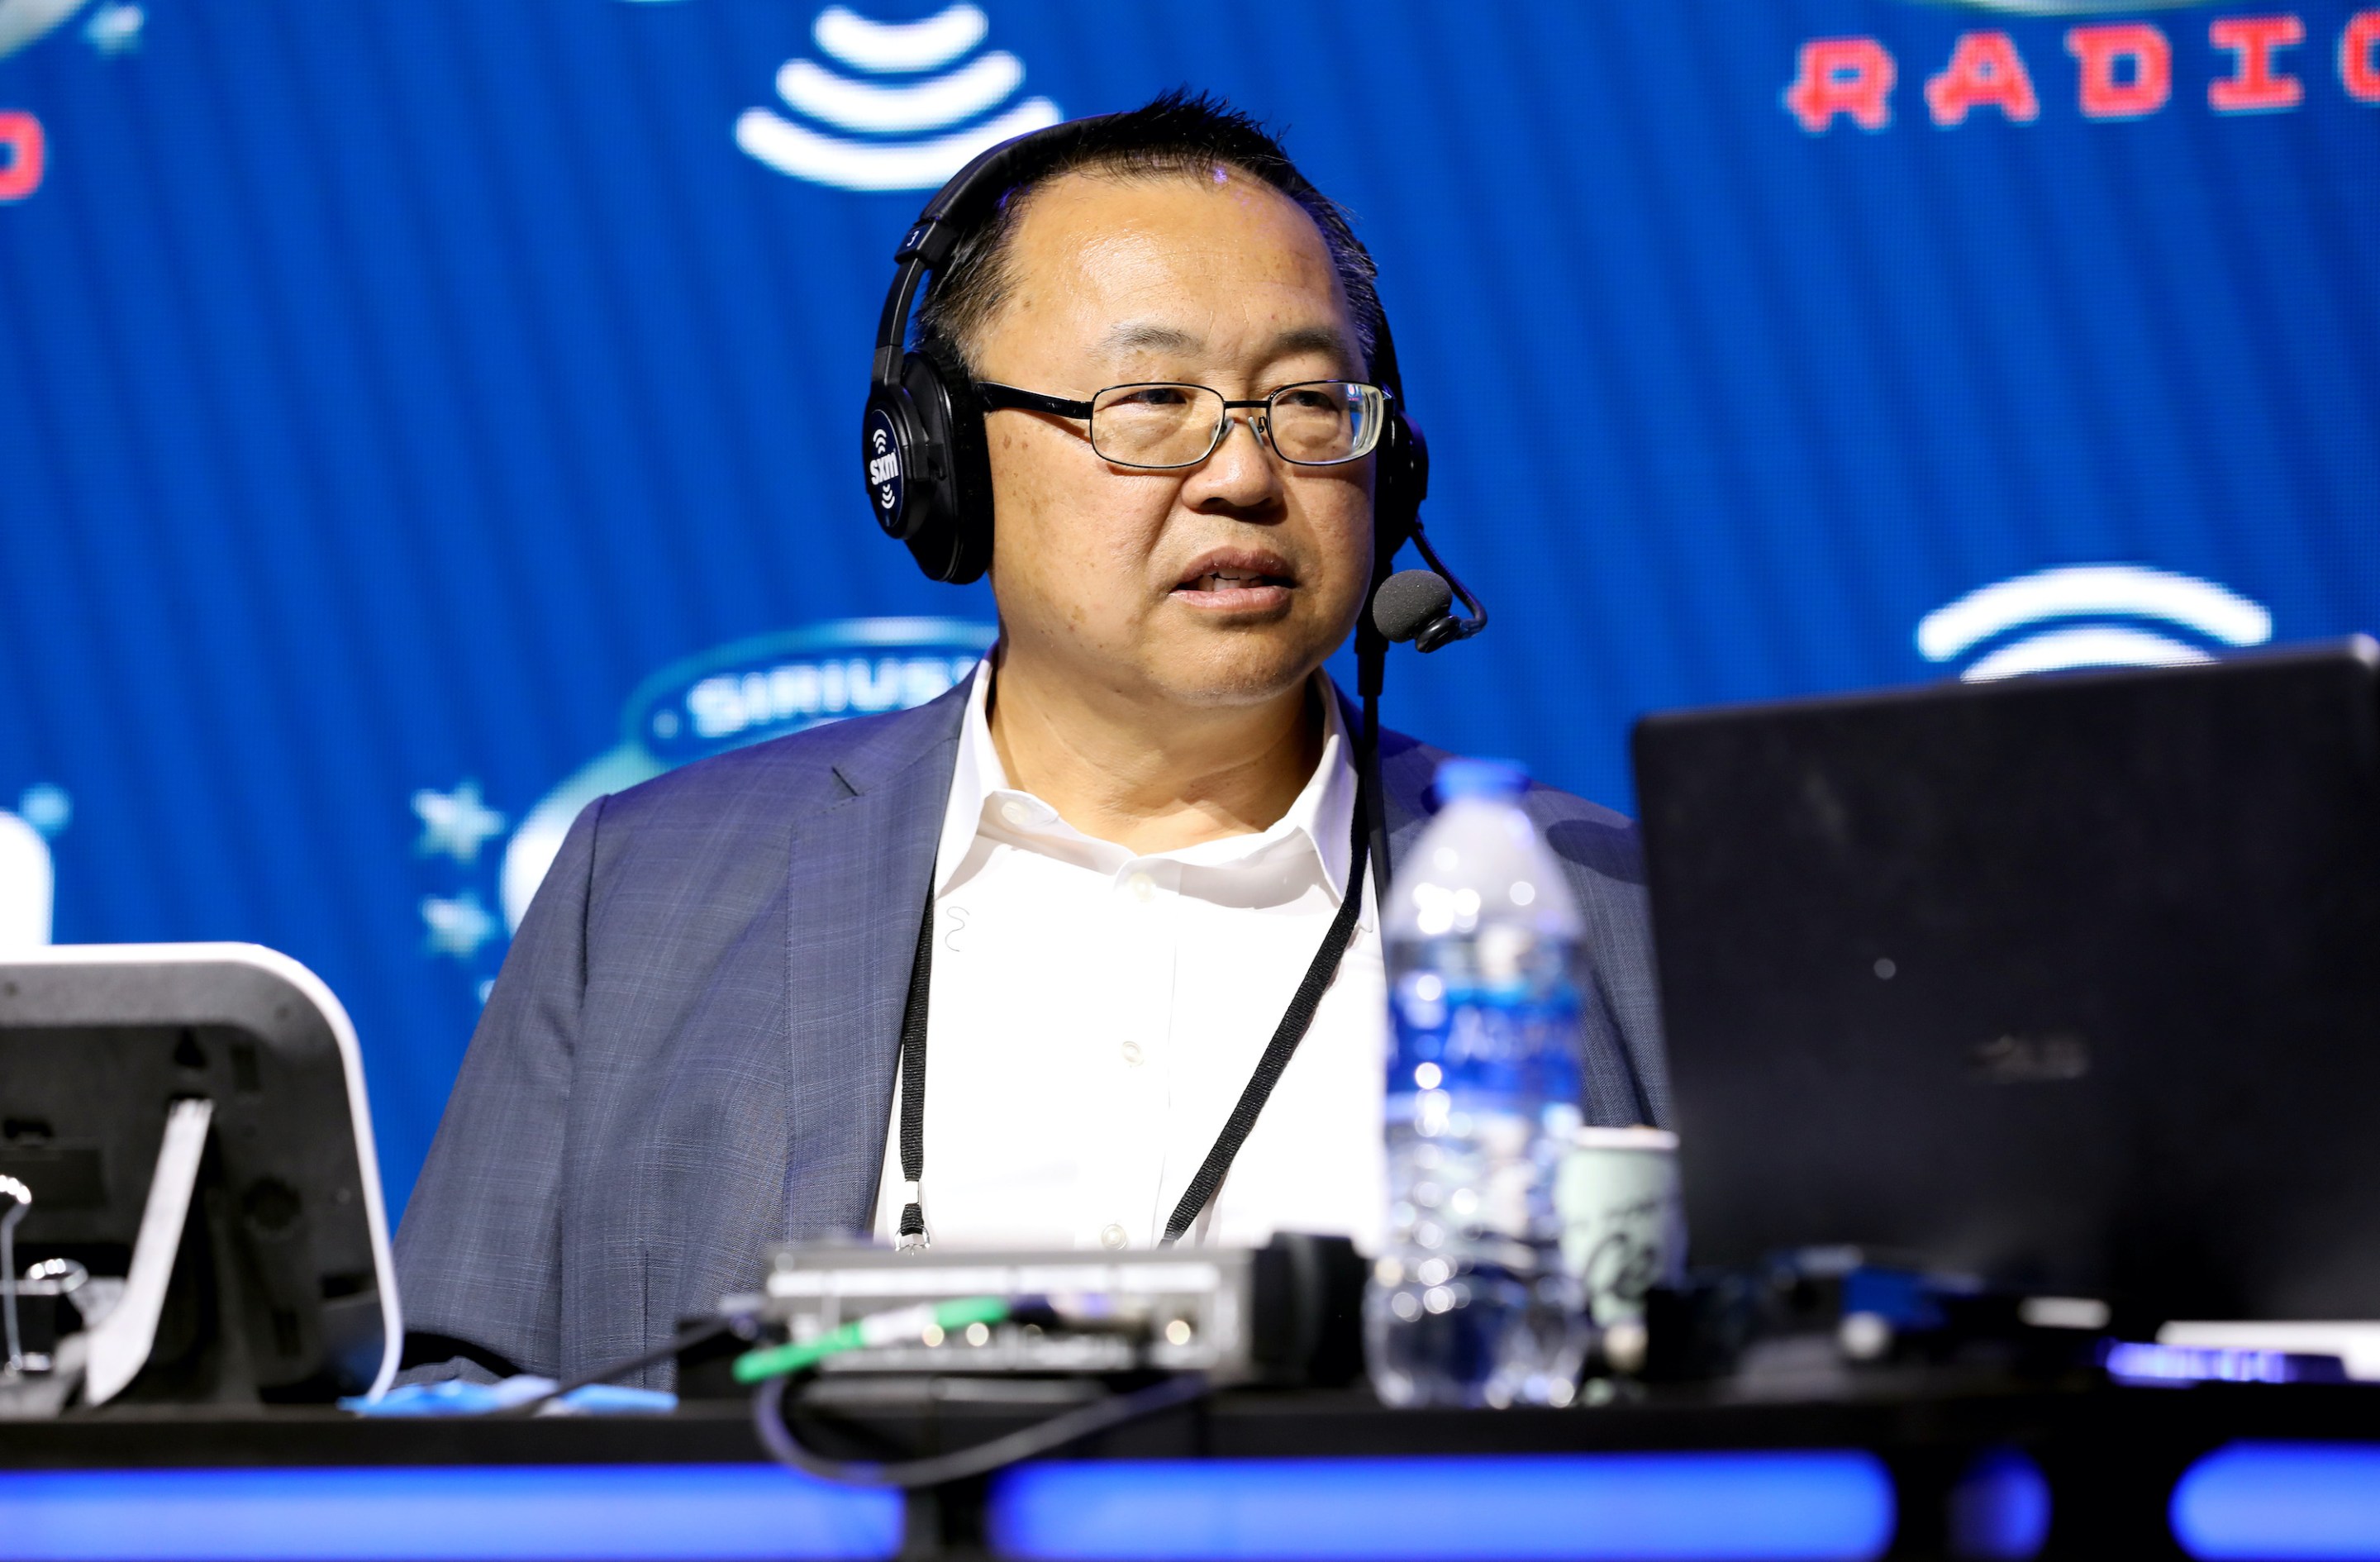 David Chao speaks onstage during day 2 of SiriusXM at Super Bowl LIV on January 30, 2020 in Miami, Florida.